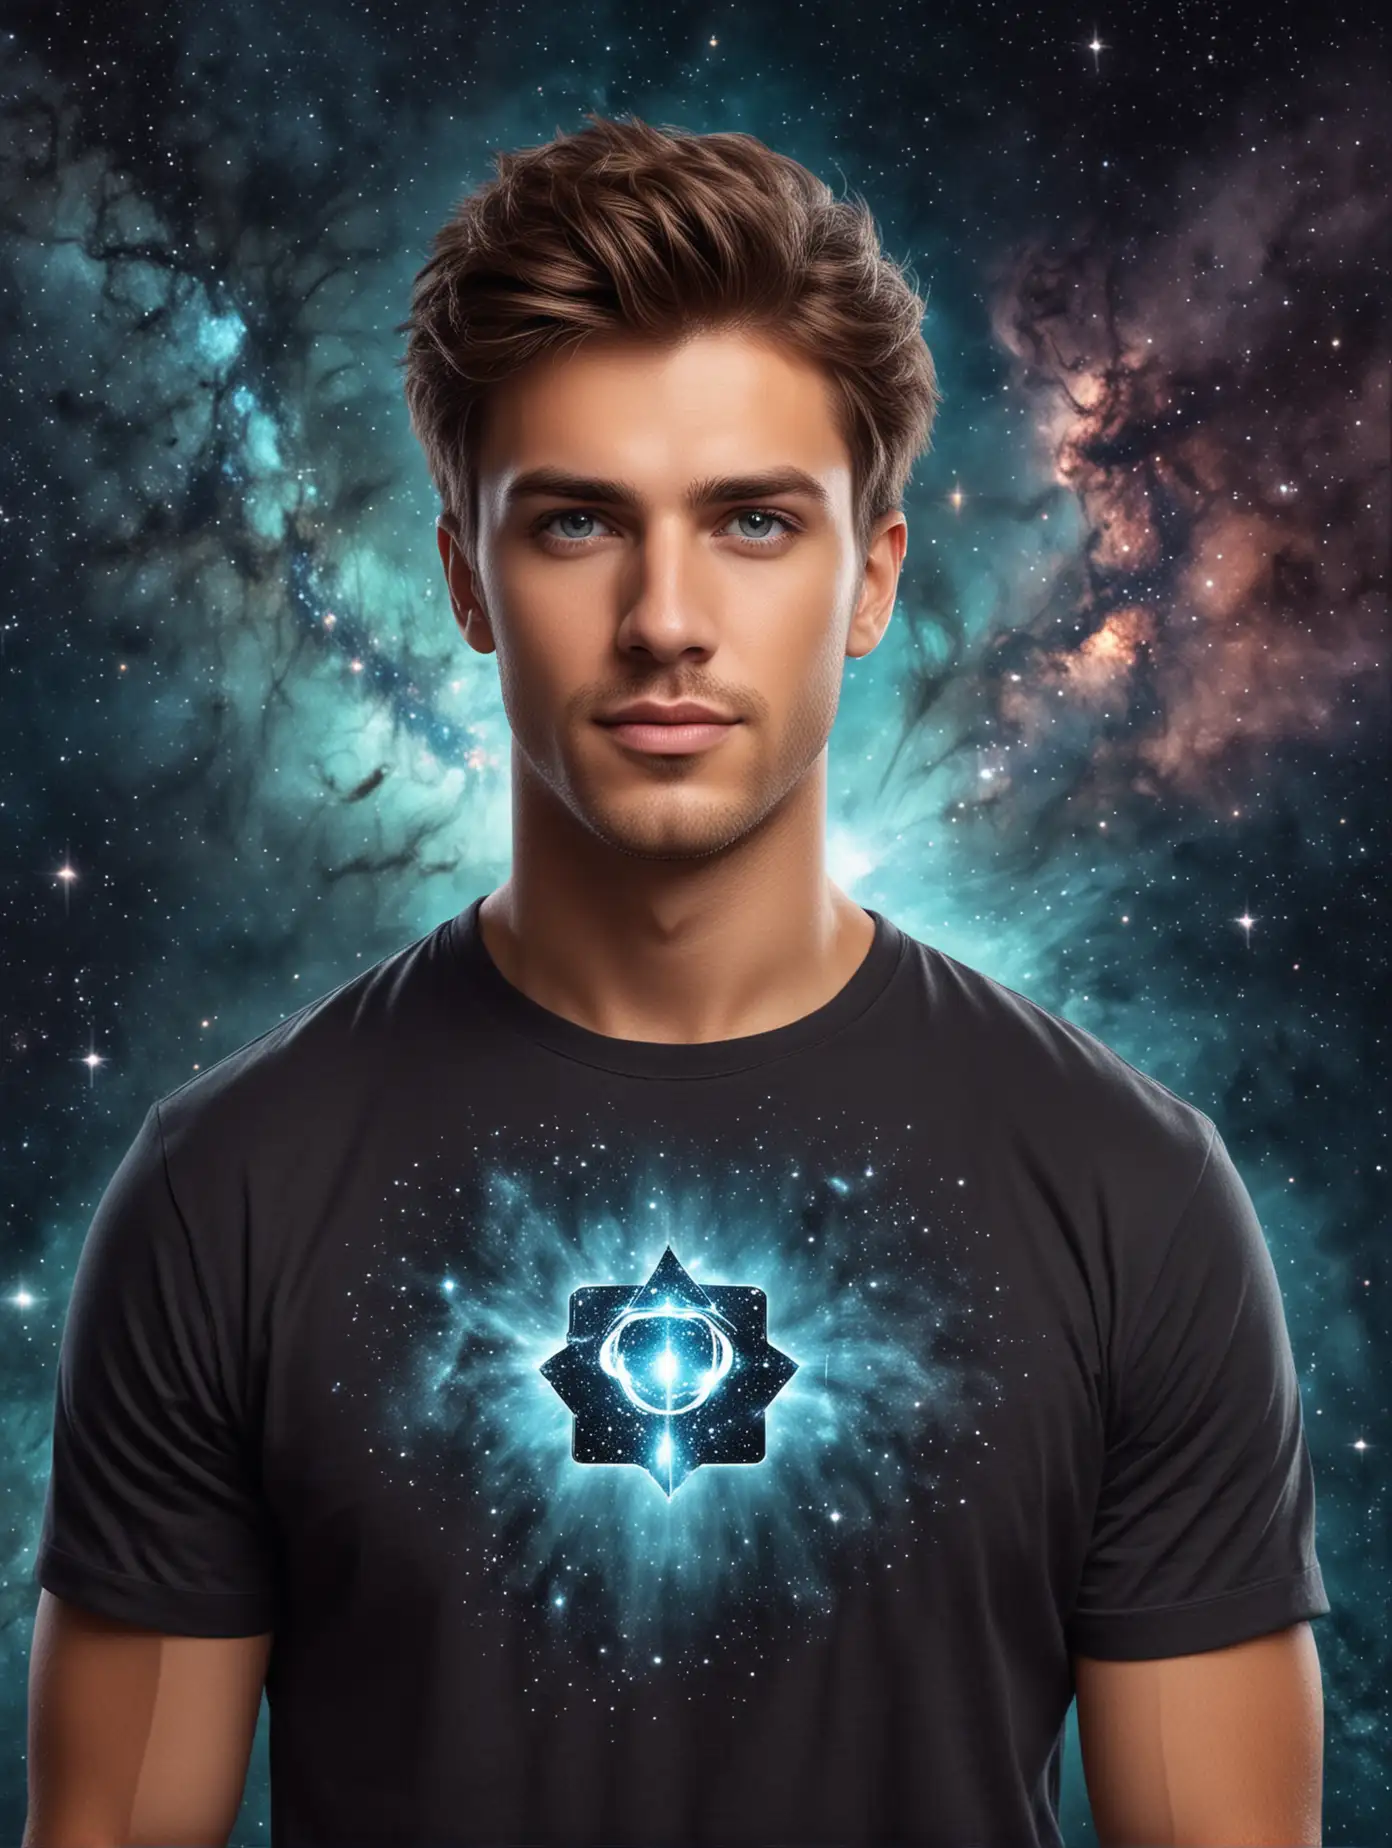 A handsome man with brown hair and aquamarine eyes, he wears a t-shirt with the symbol of The All on it, background is a space nebula with stars, portrait, front view, in the style of photorealistic